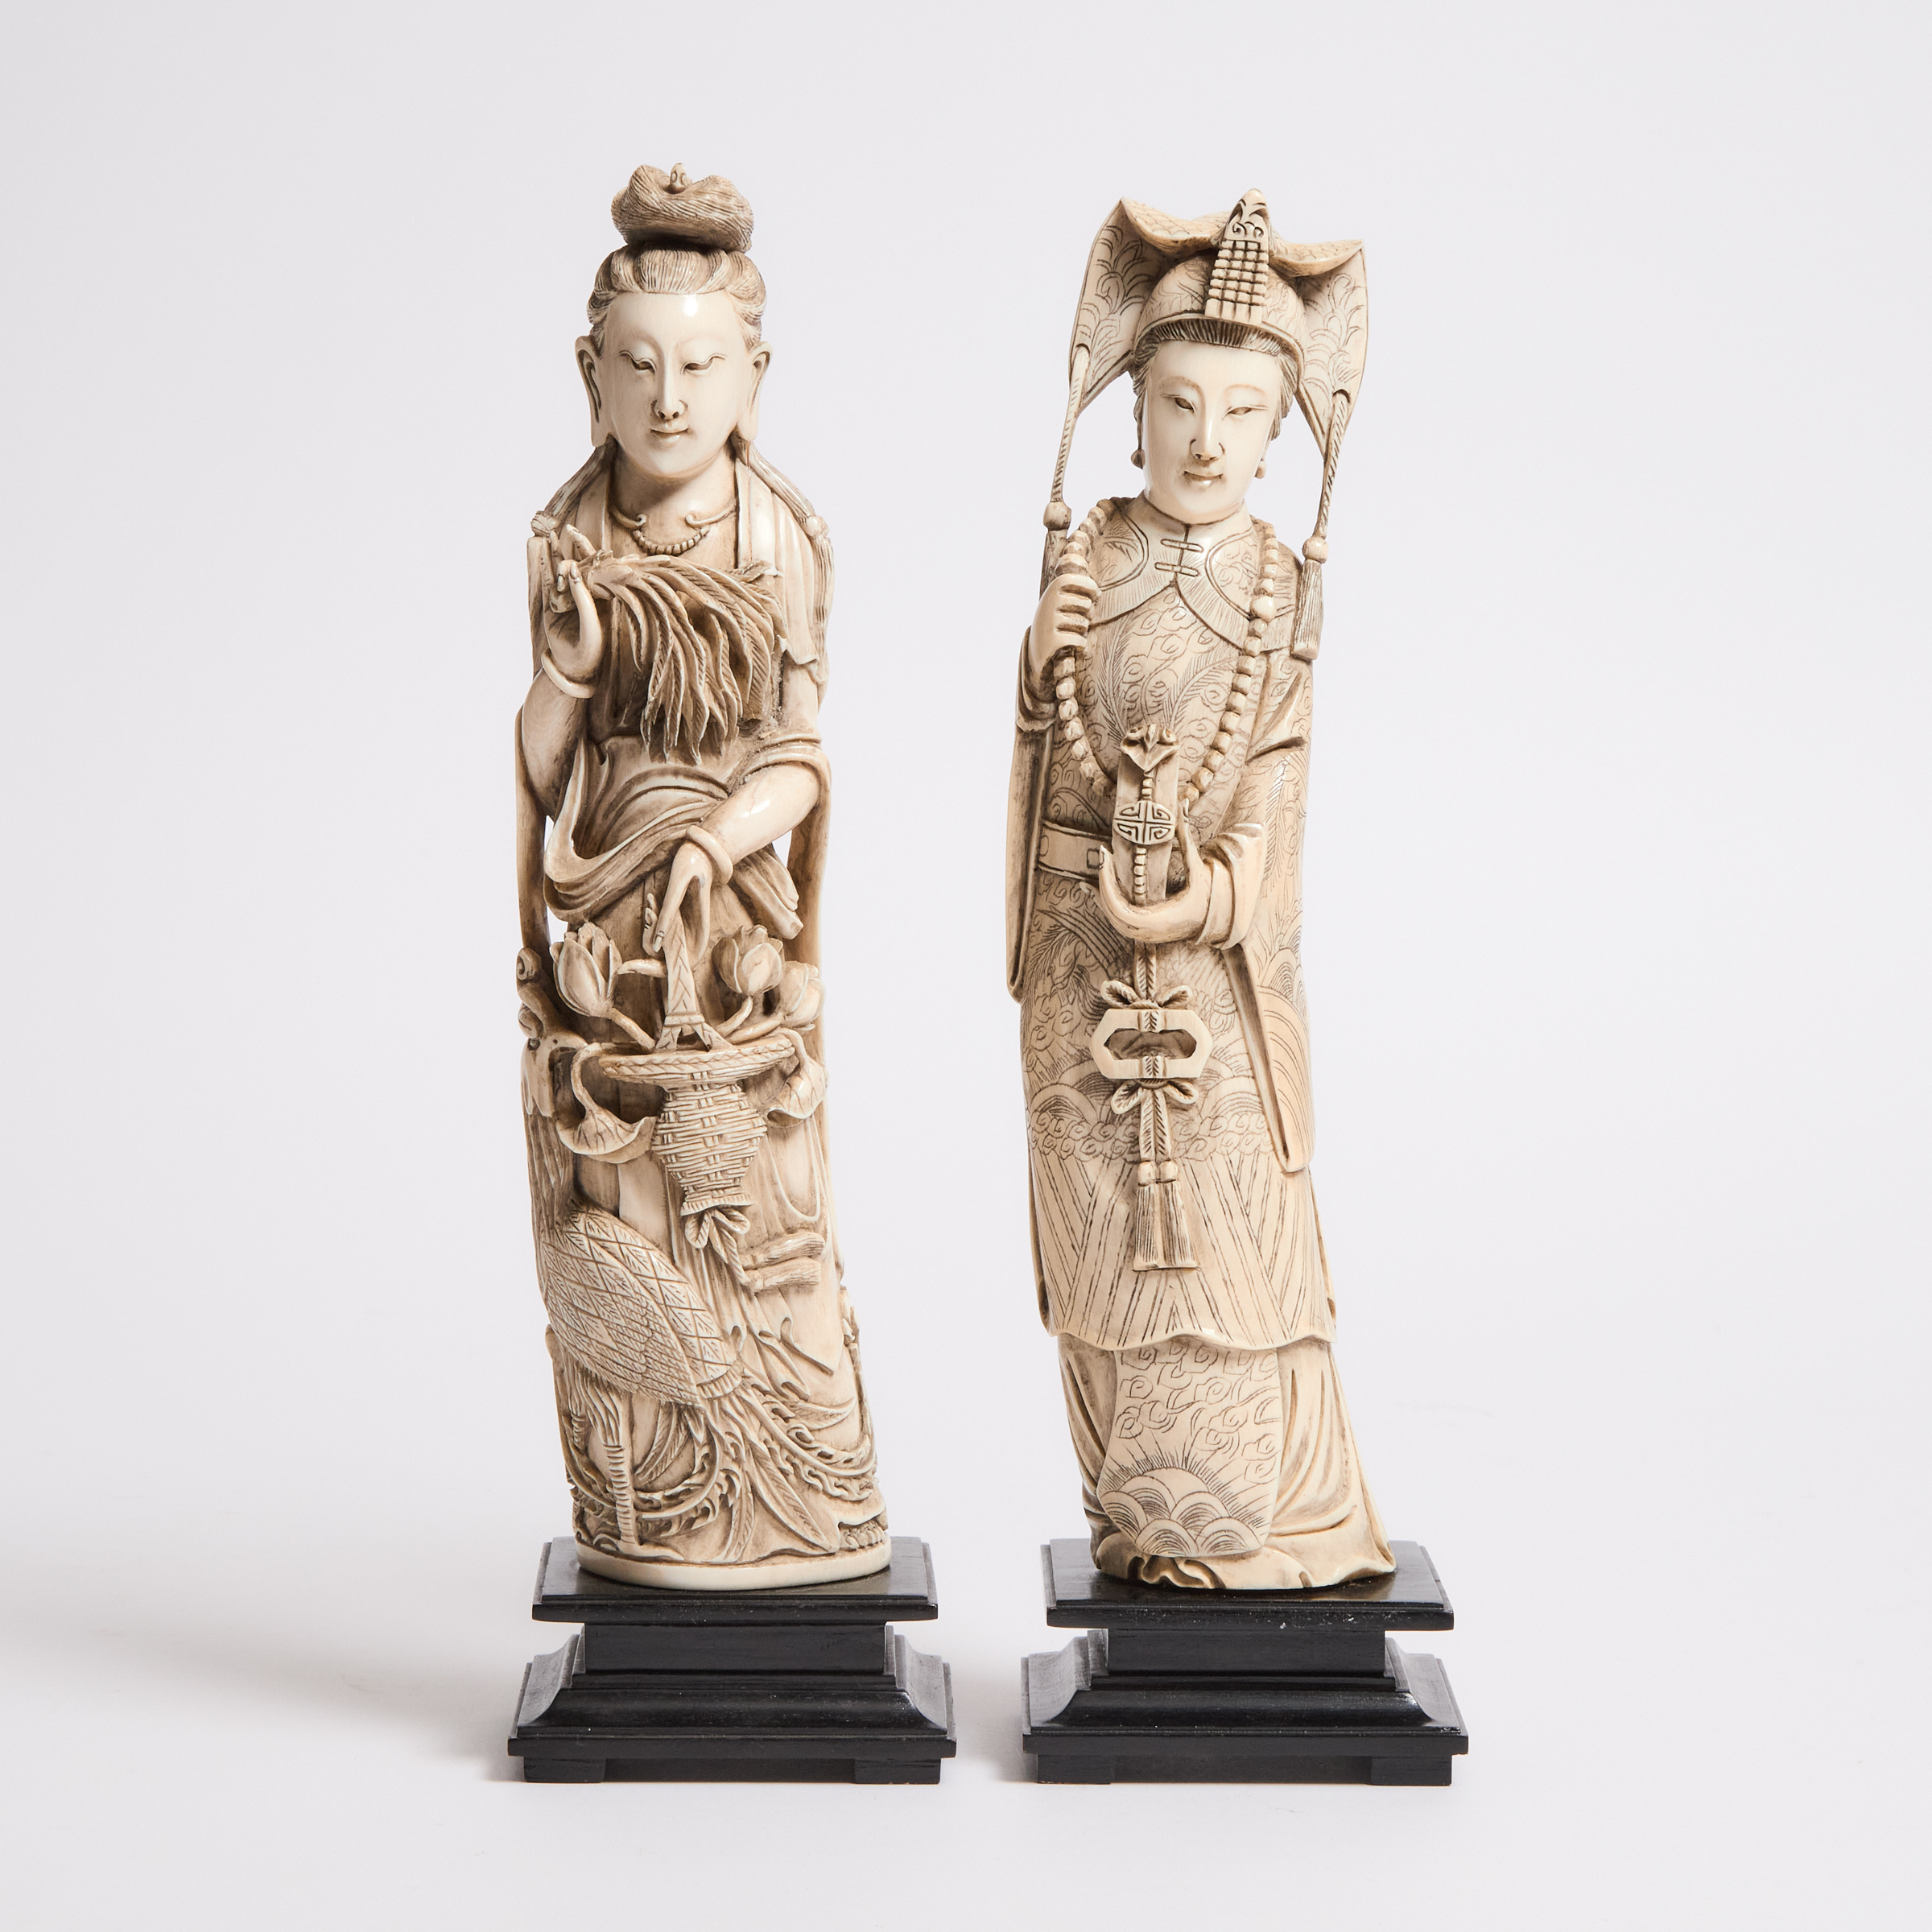 Two Ivory Figures of Ladies Republican 2fb05d9